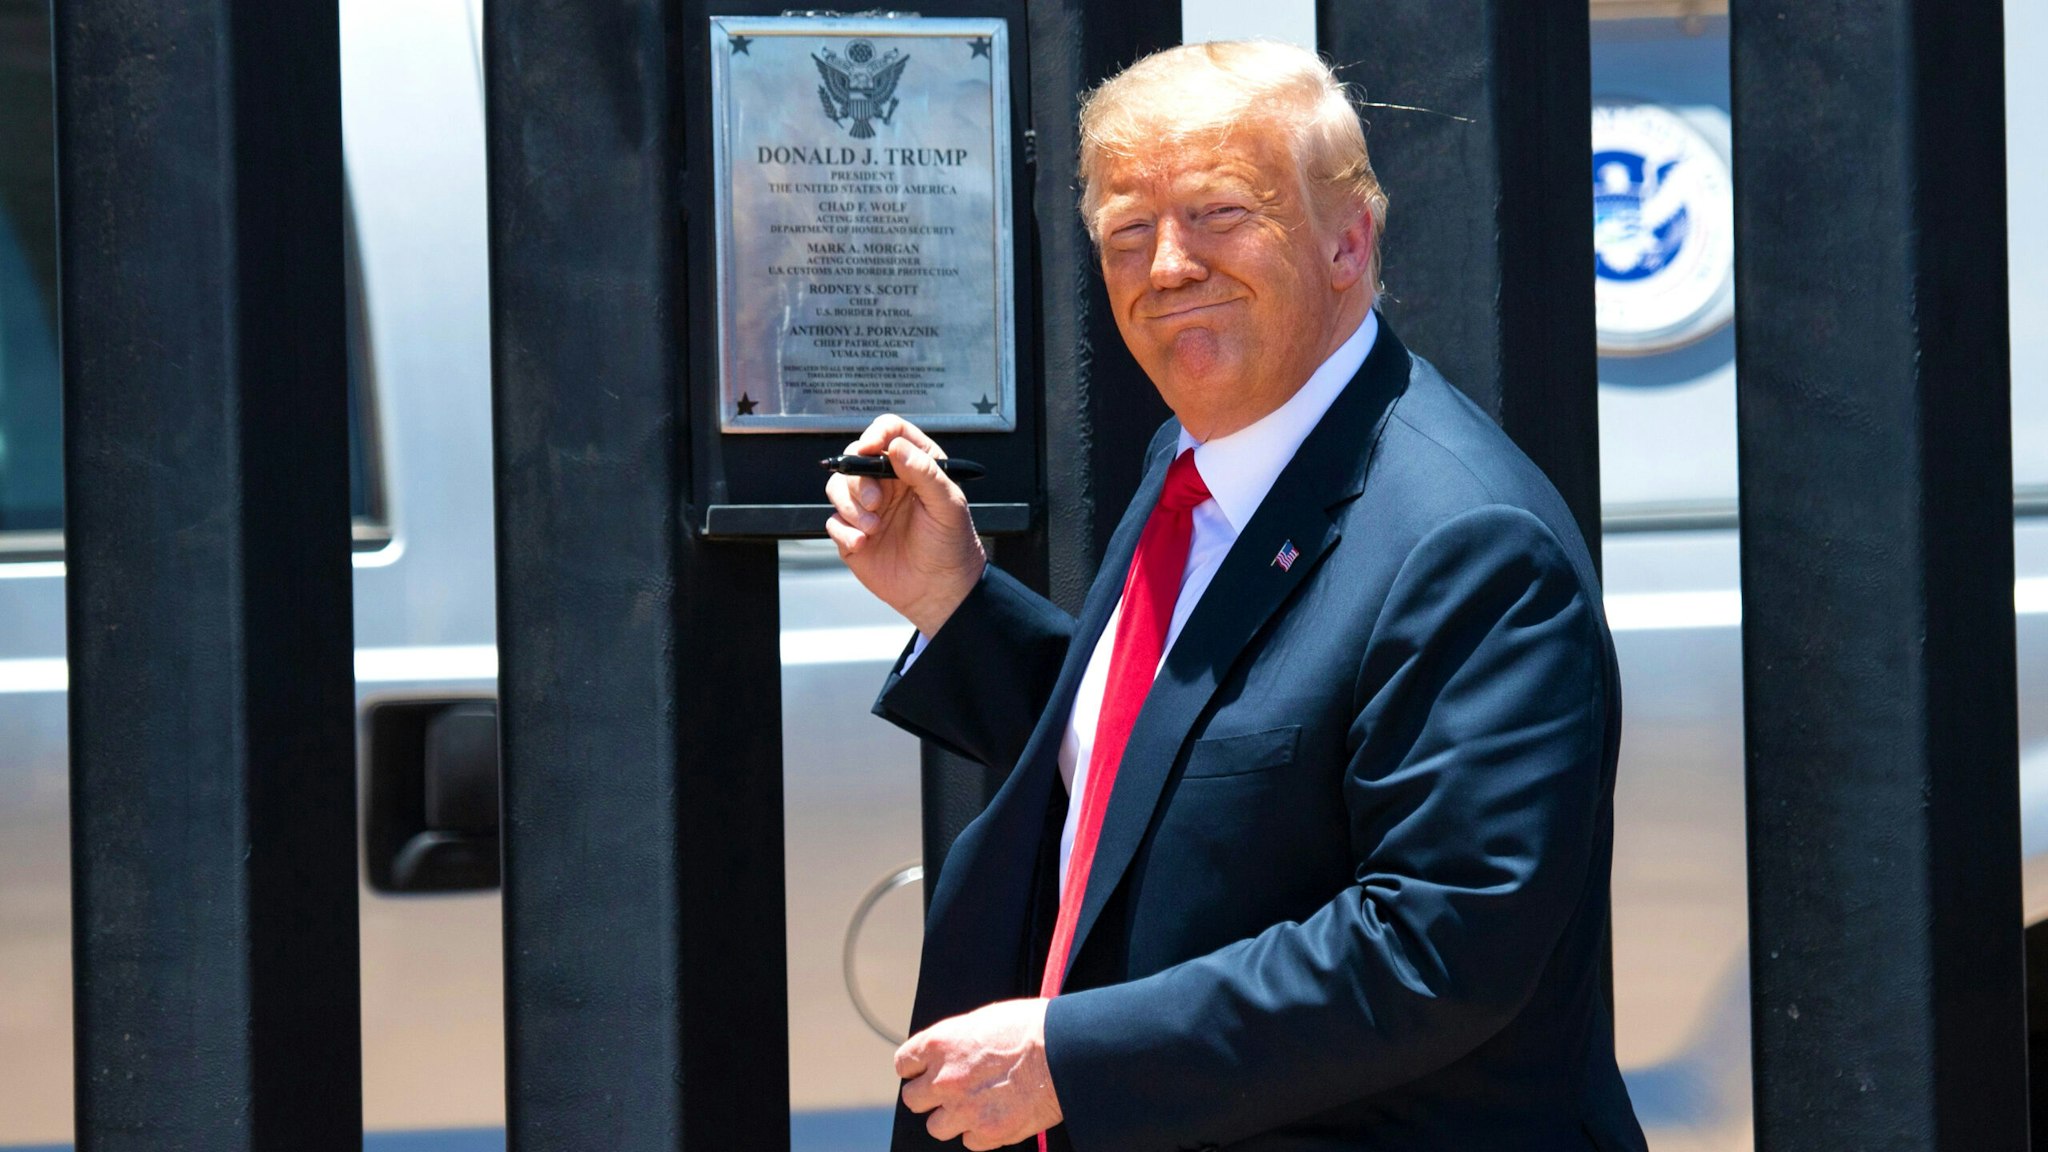 US President Donald Trump signs a plaque as he participates in a ceremony commemorating the 200th mile of border wall at the international border with Mexico in San Luis, Arizona, June 23, 2020.